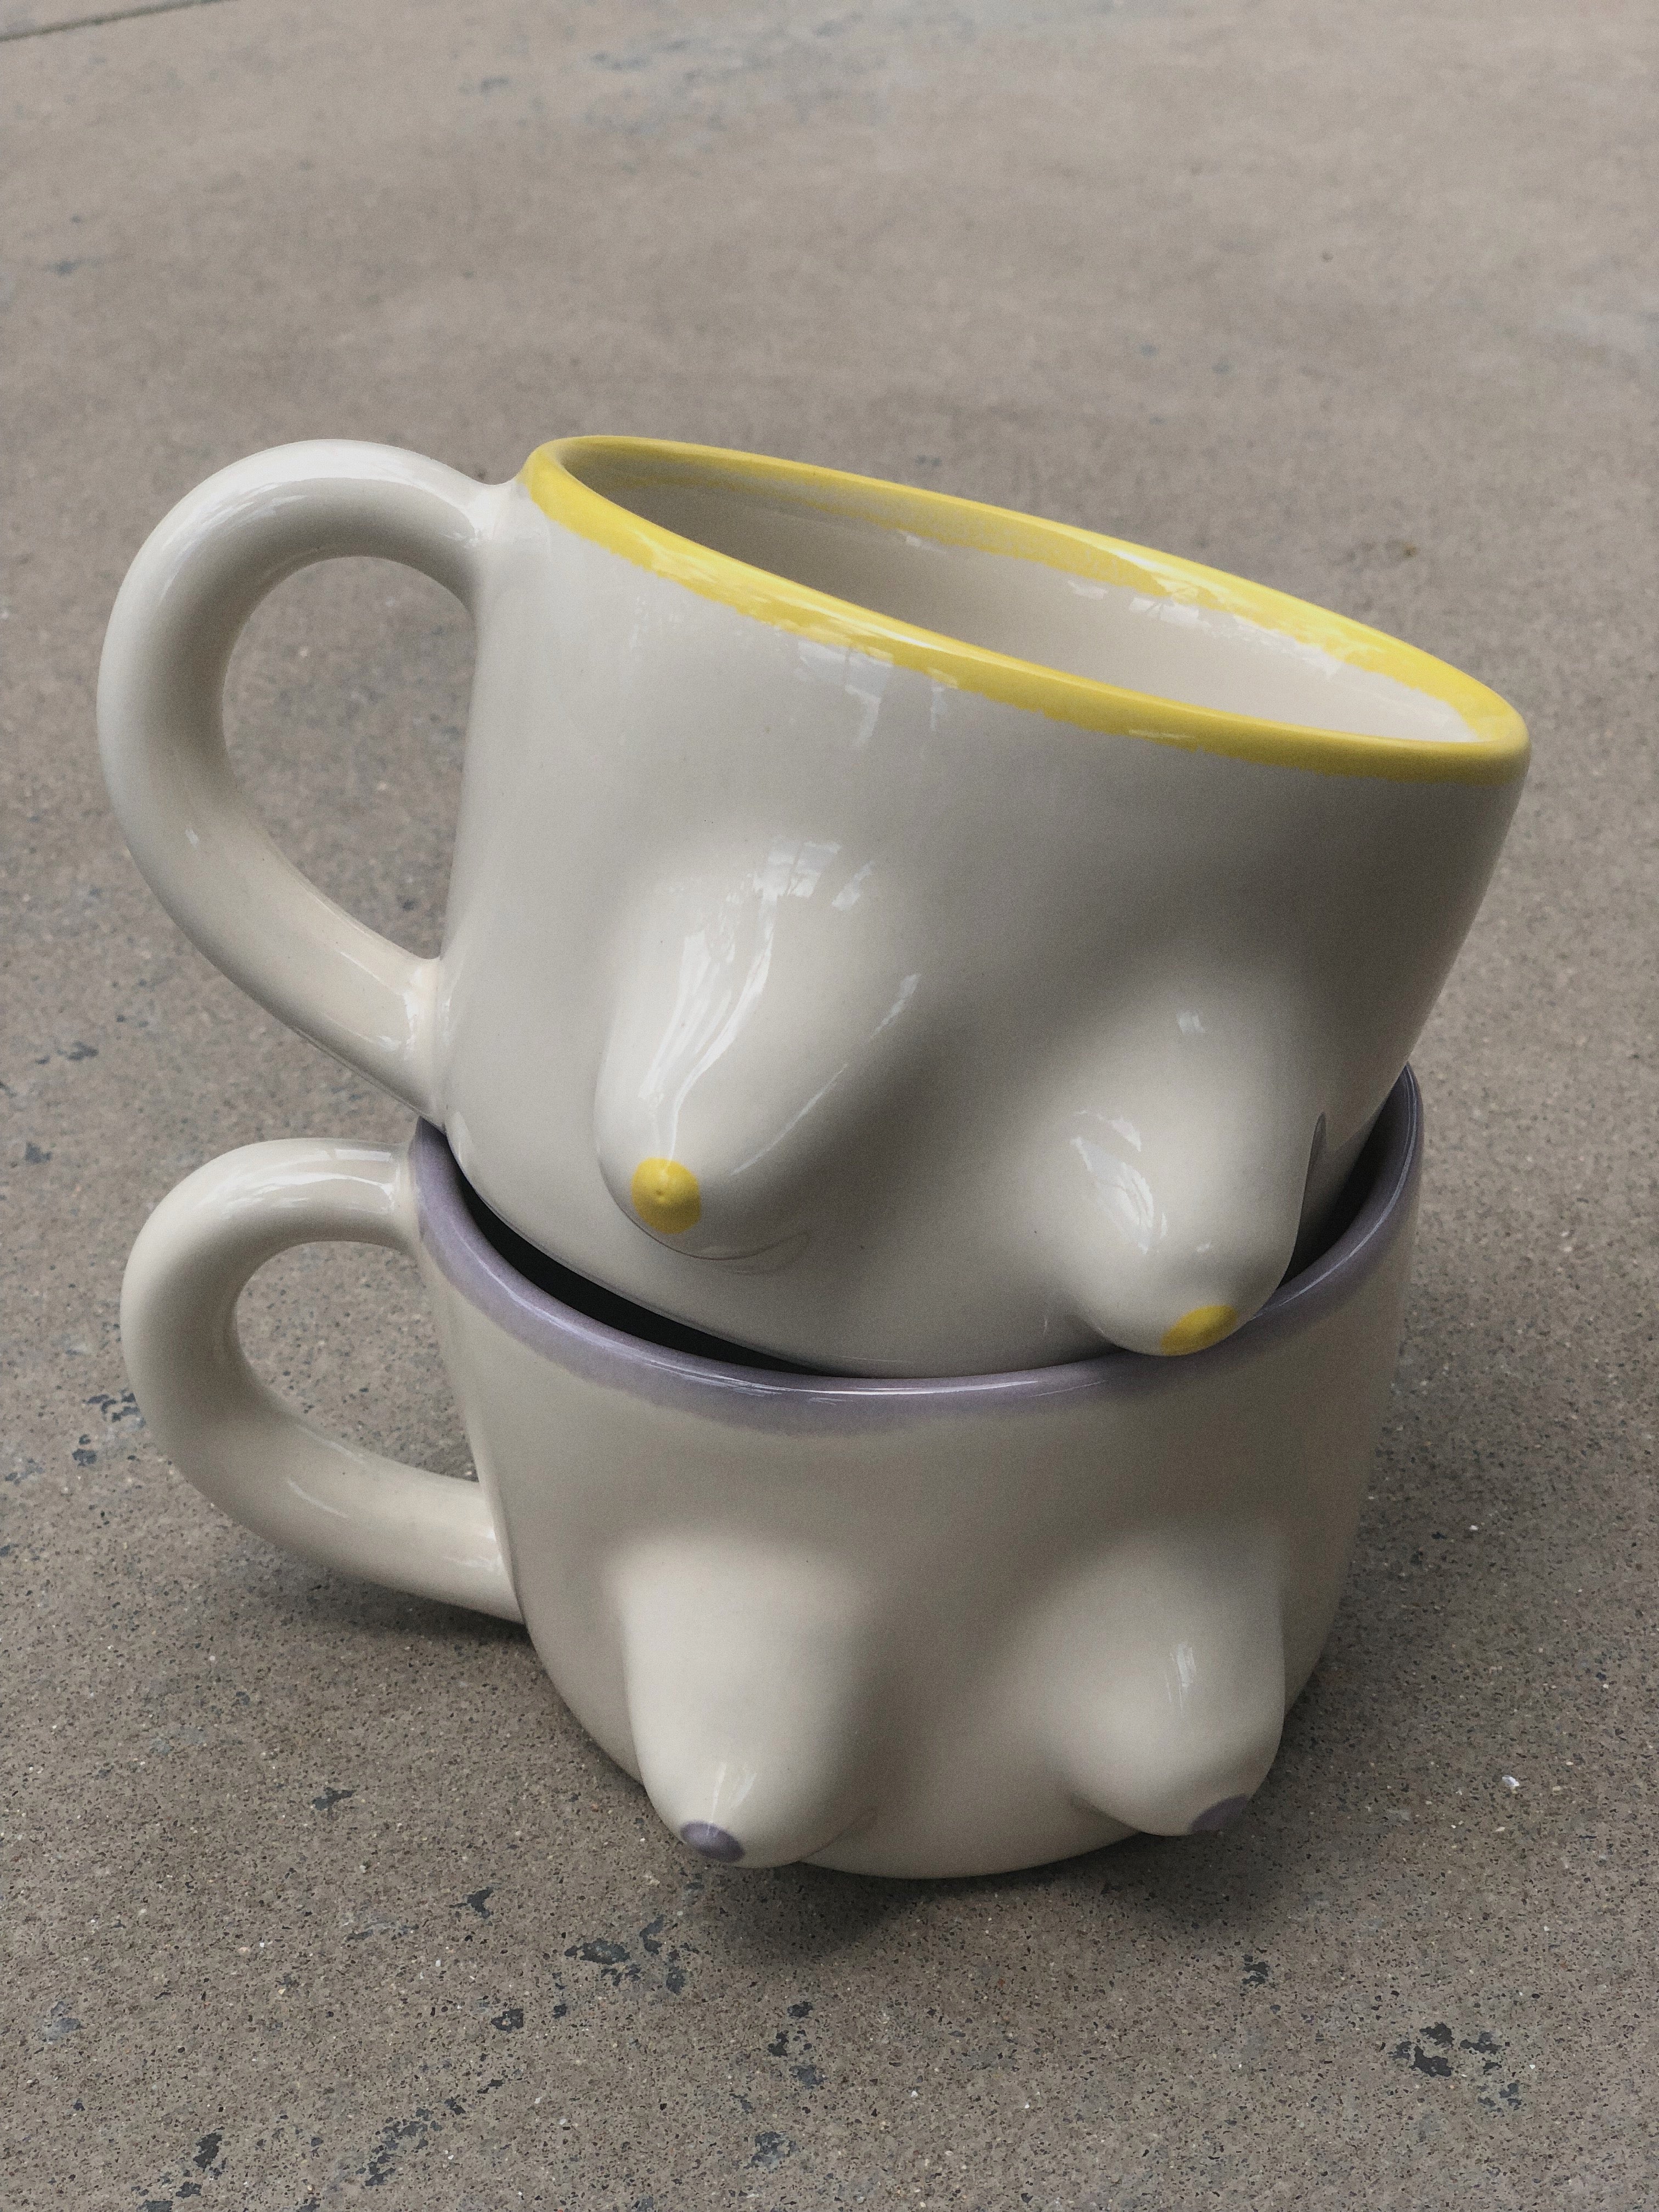 Boobie Cup was $95 now $66.50